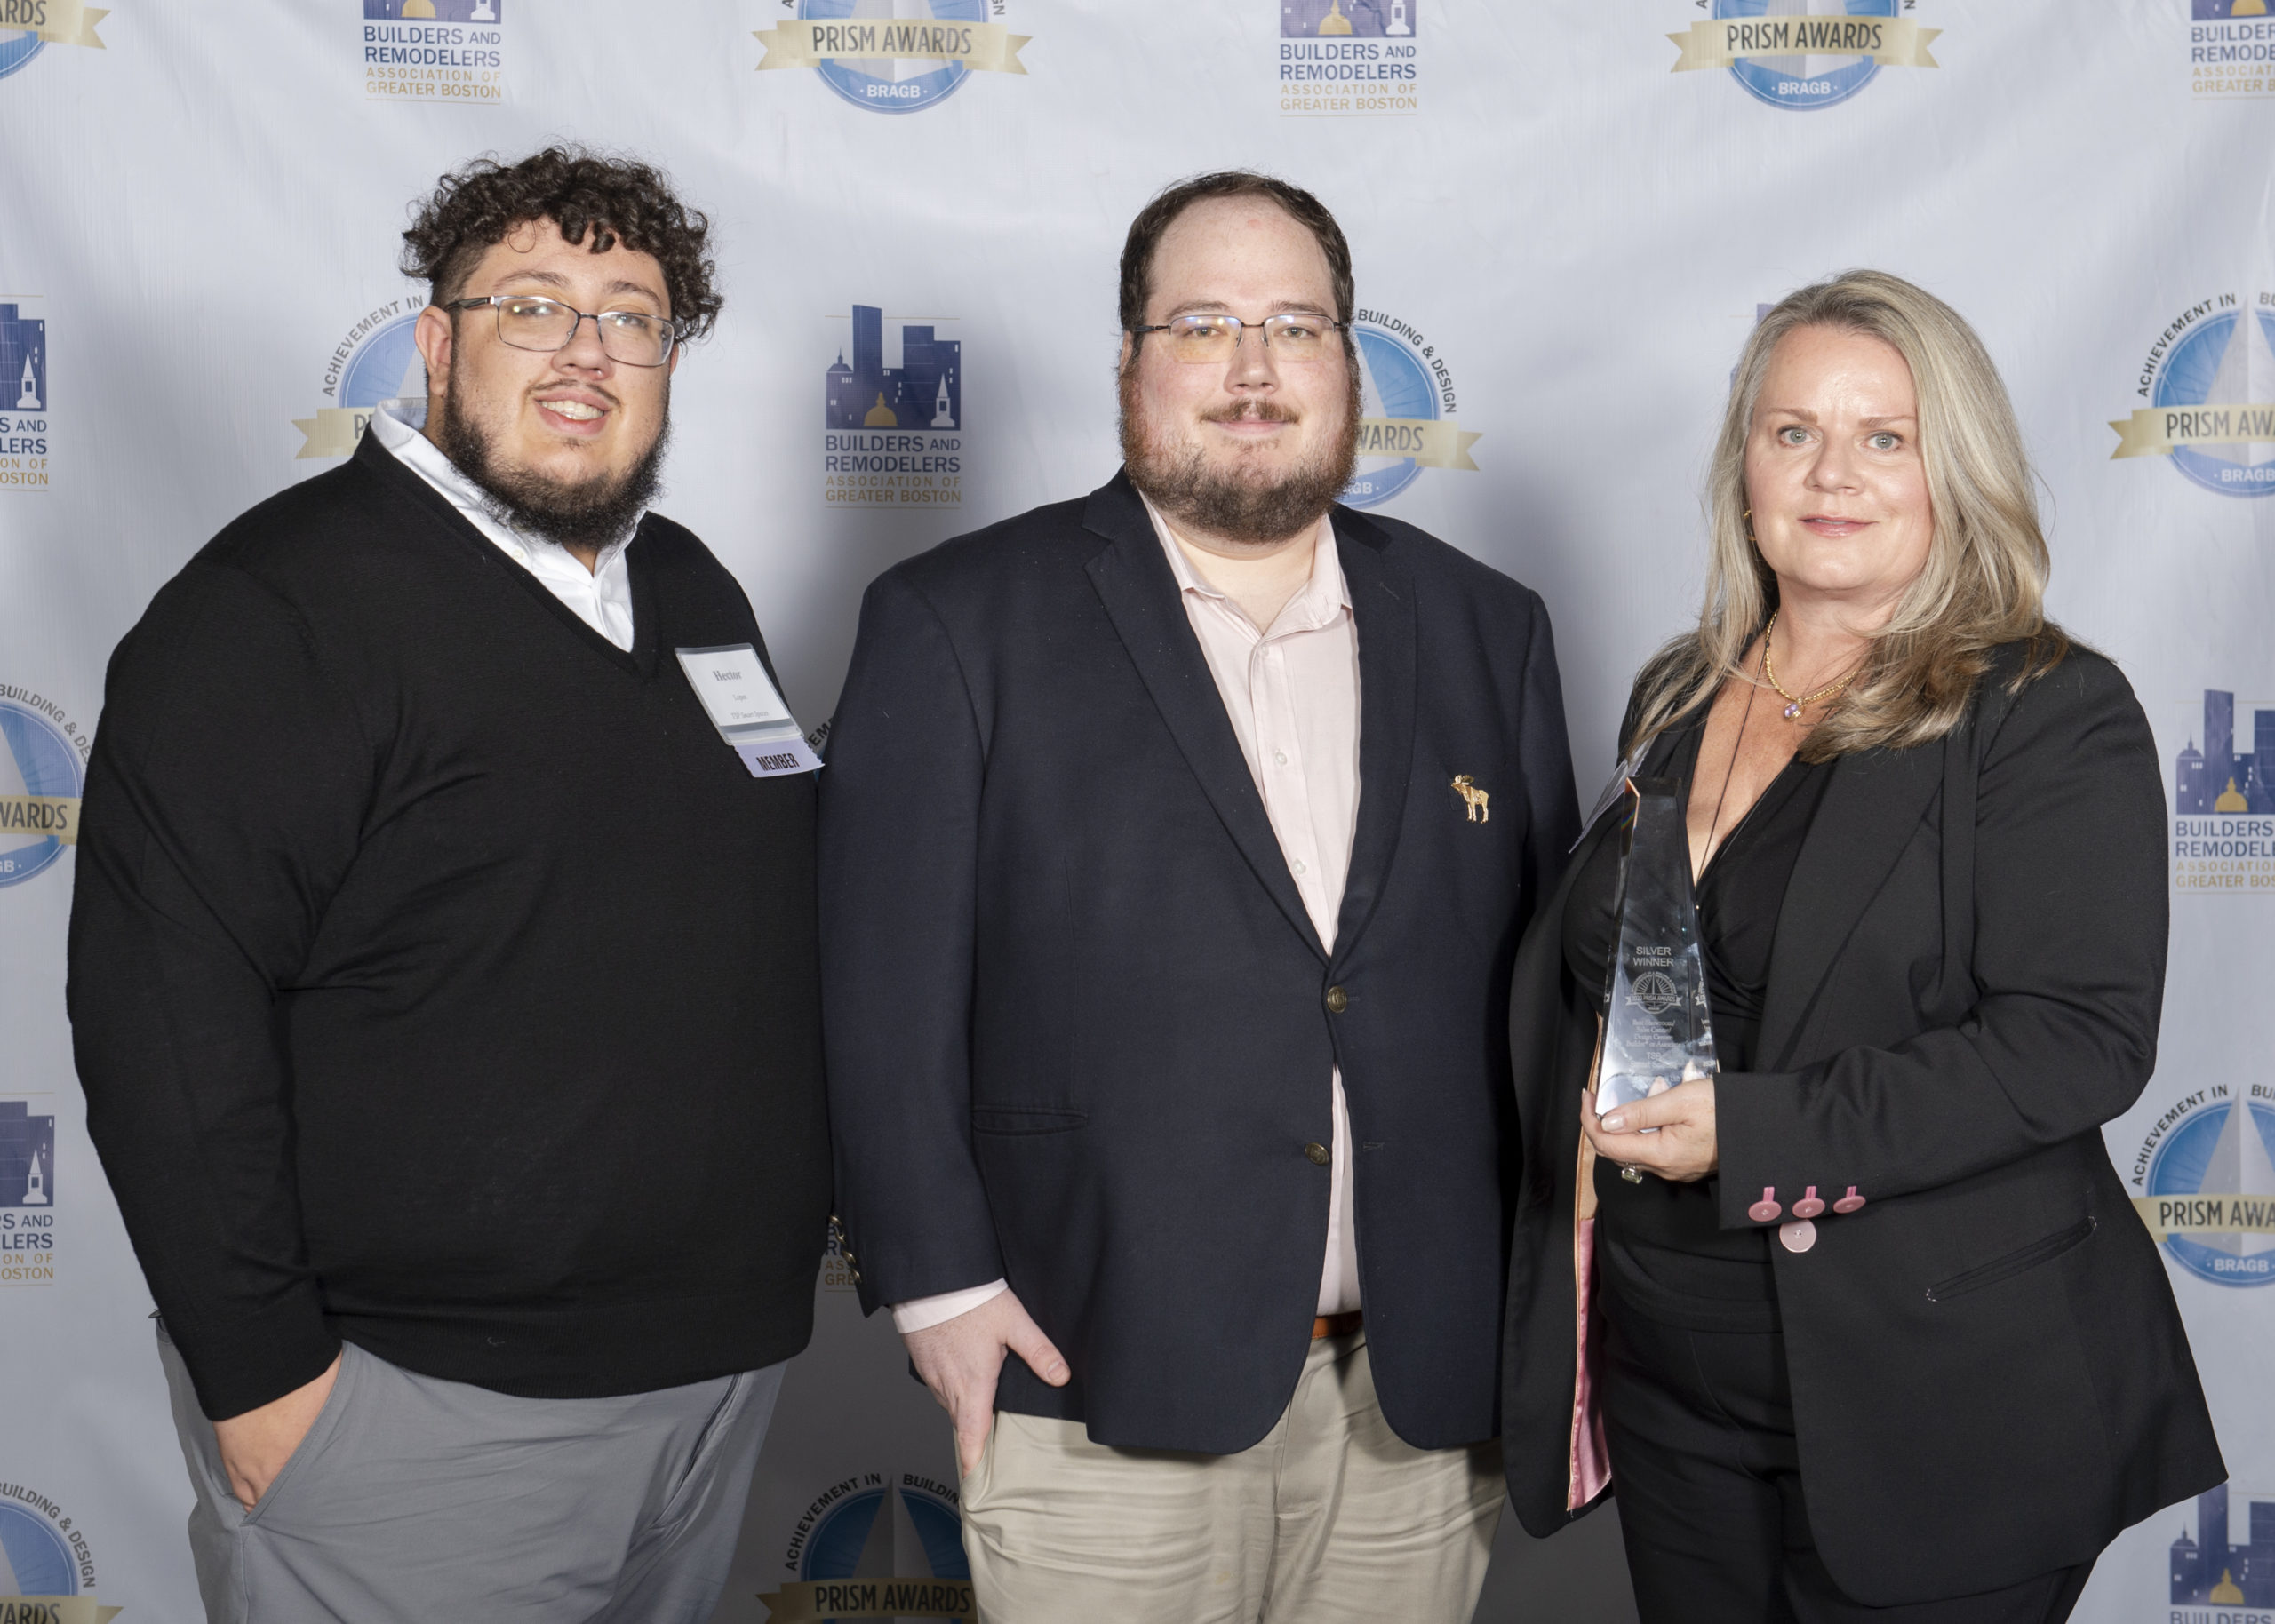 SMARTCITY SOLUTION OF THE YEAR, Urbi clinches Top Honors at Entrepreneur  Tech Innovation Awards 2023